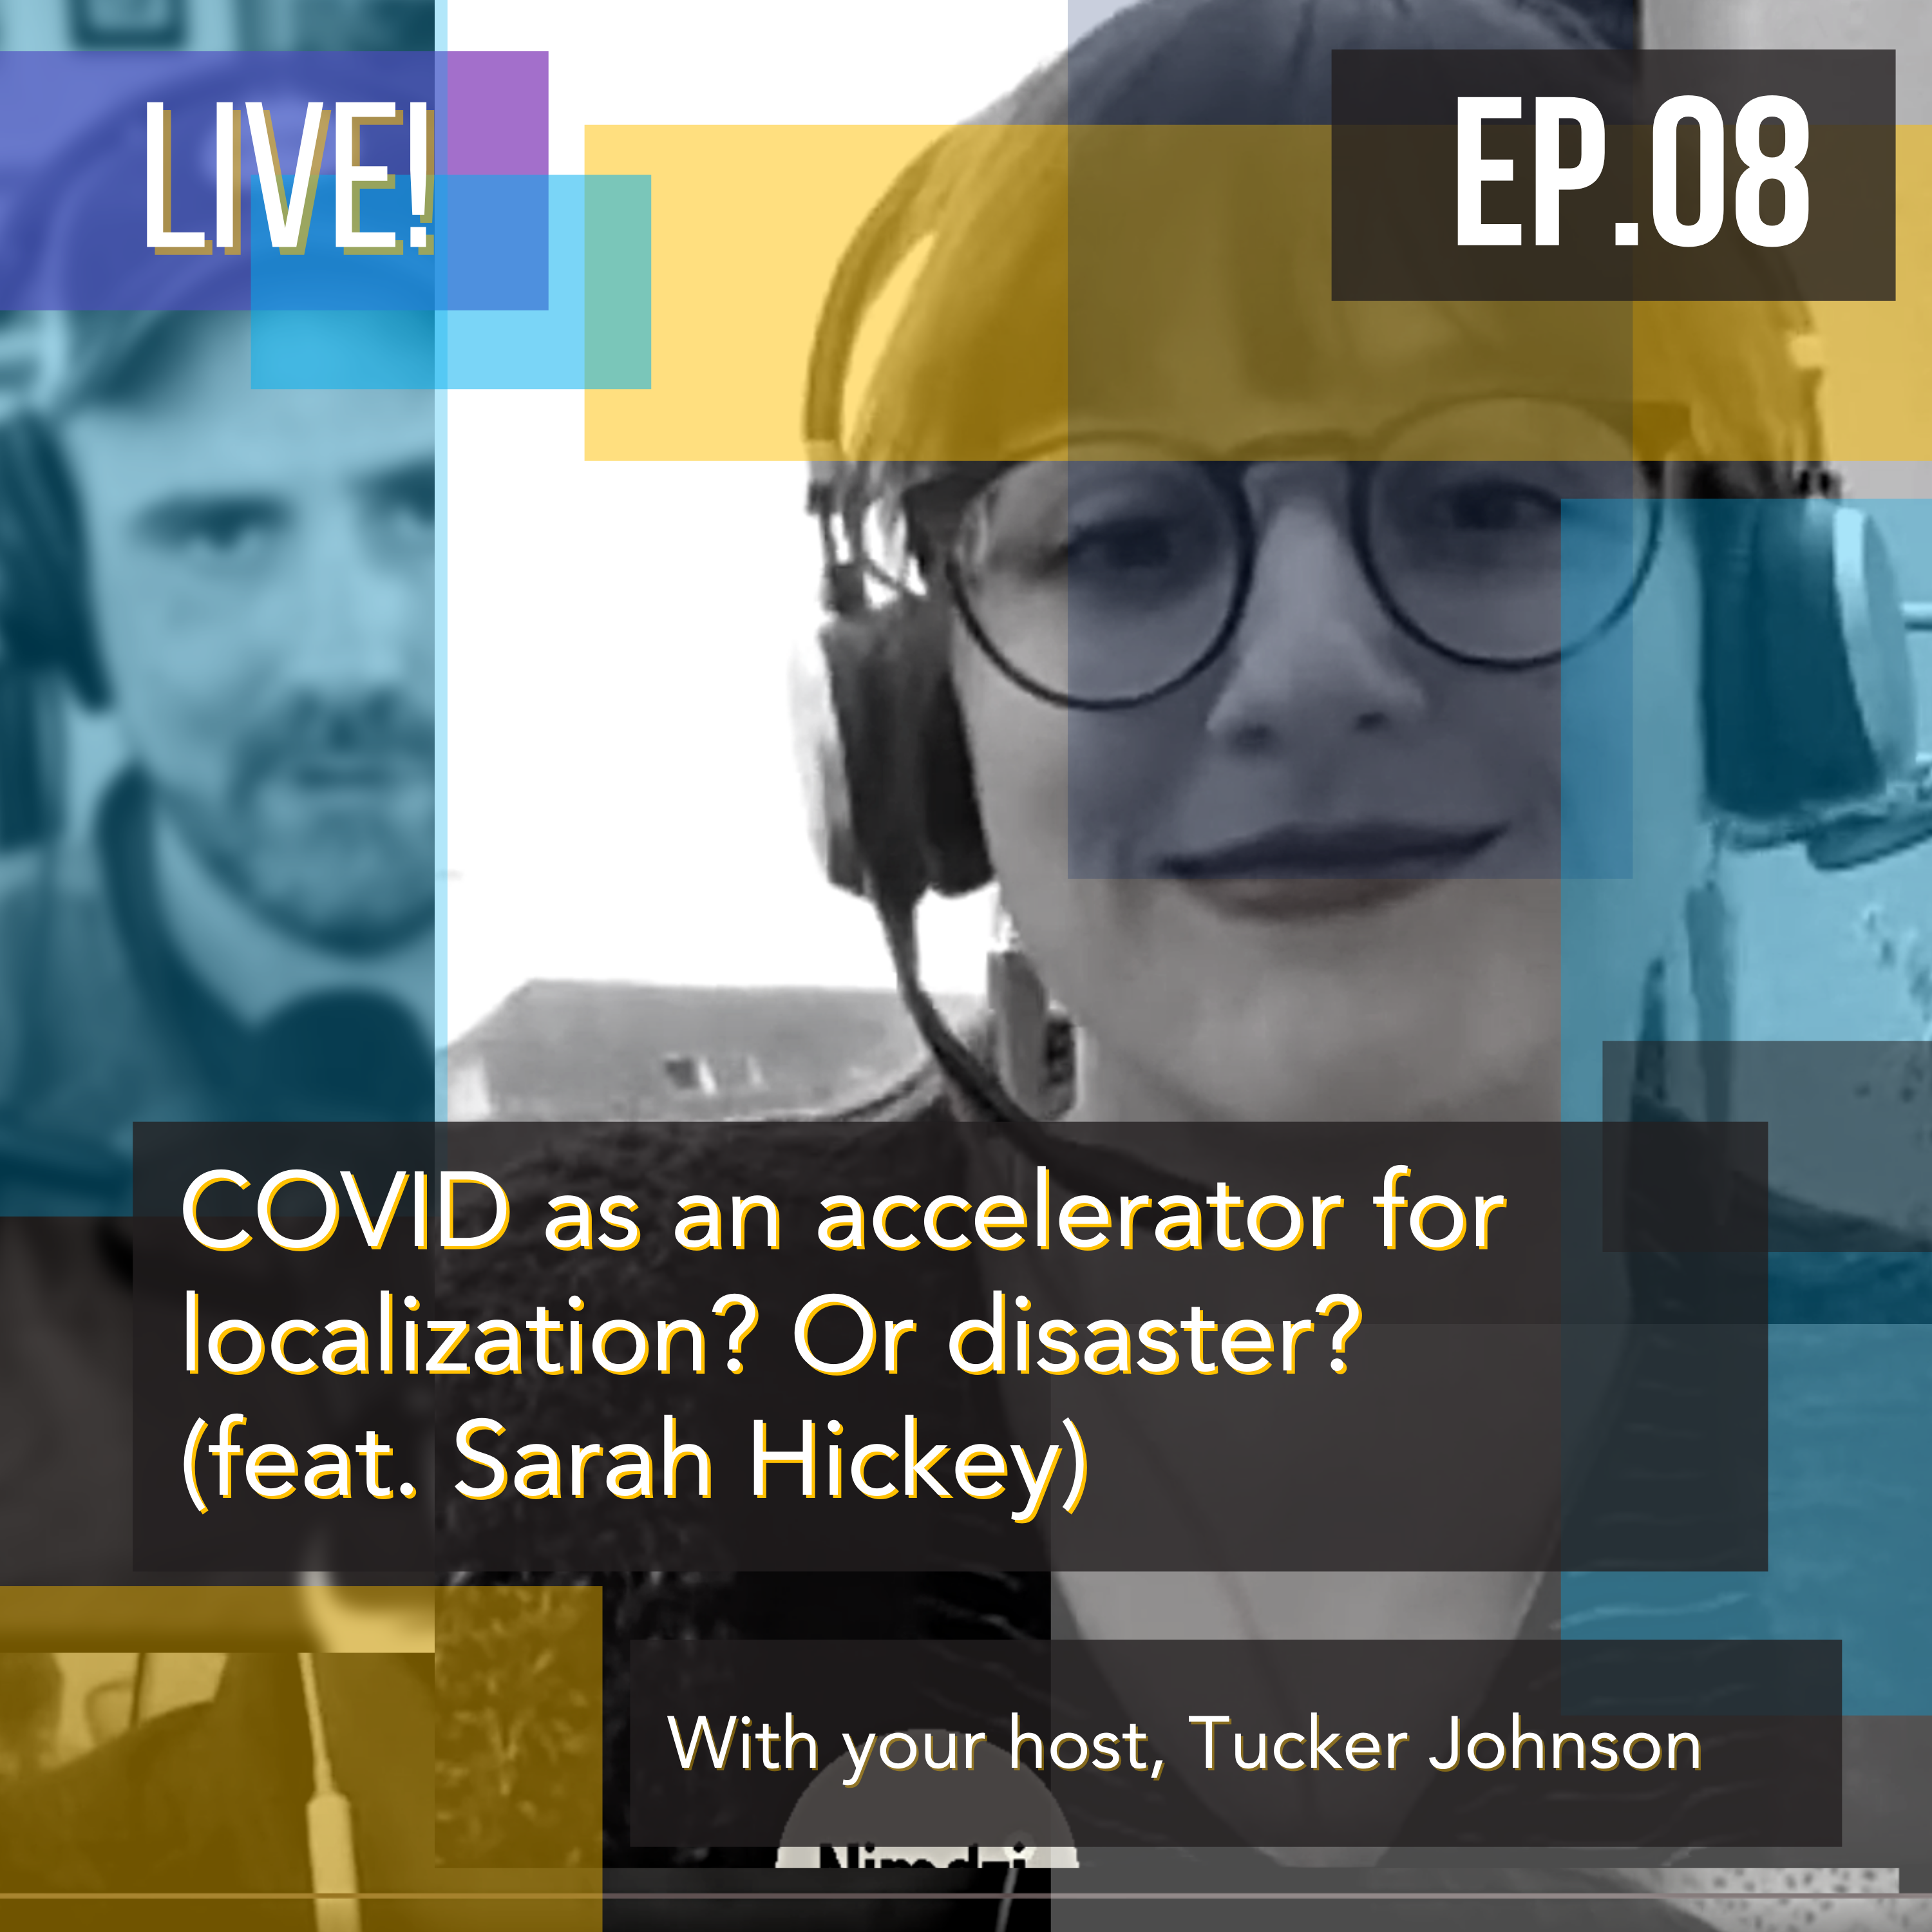 COVID as an accelerator for localization? Or disaster? Let's look at the data... (feat. Sarah Hickey)